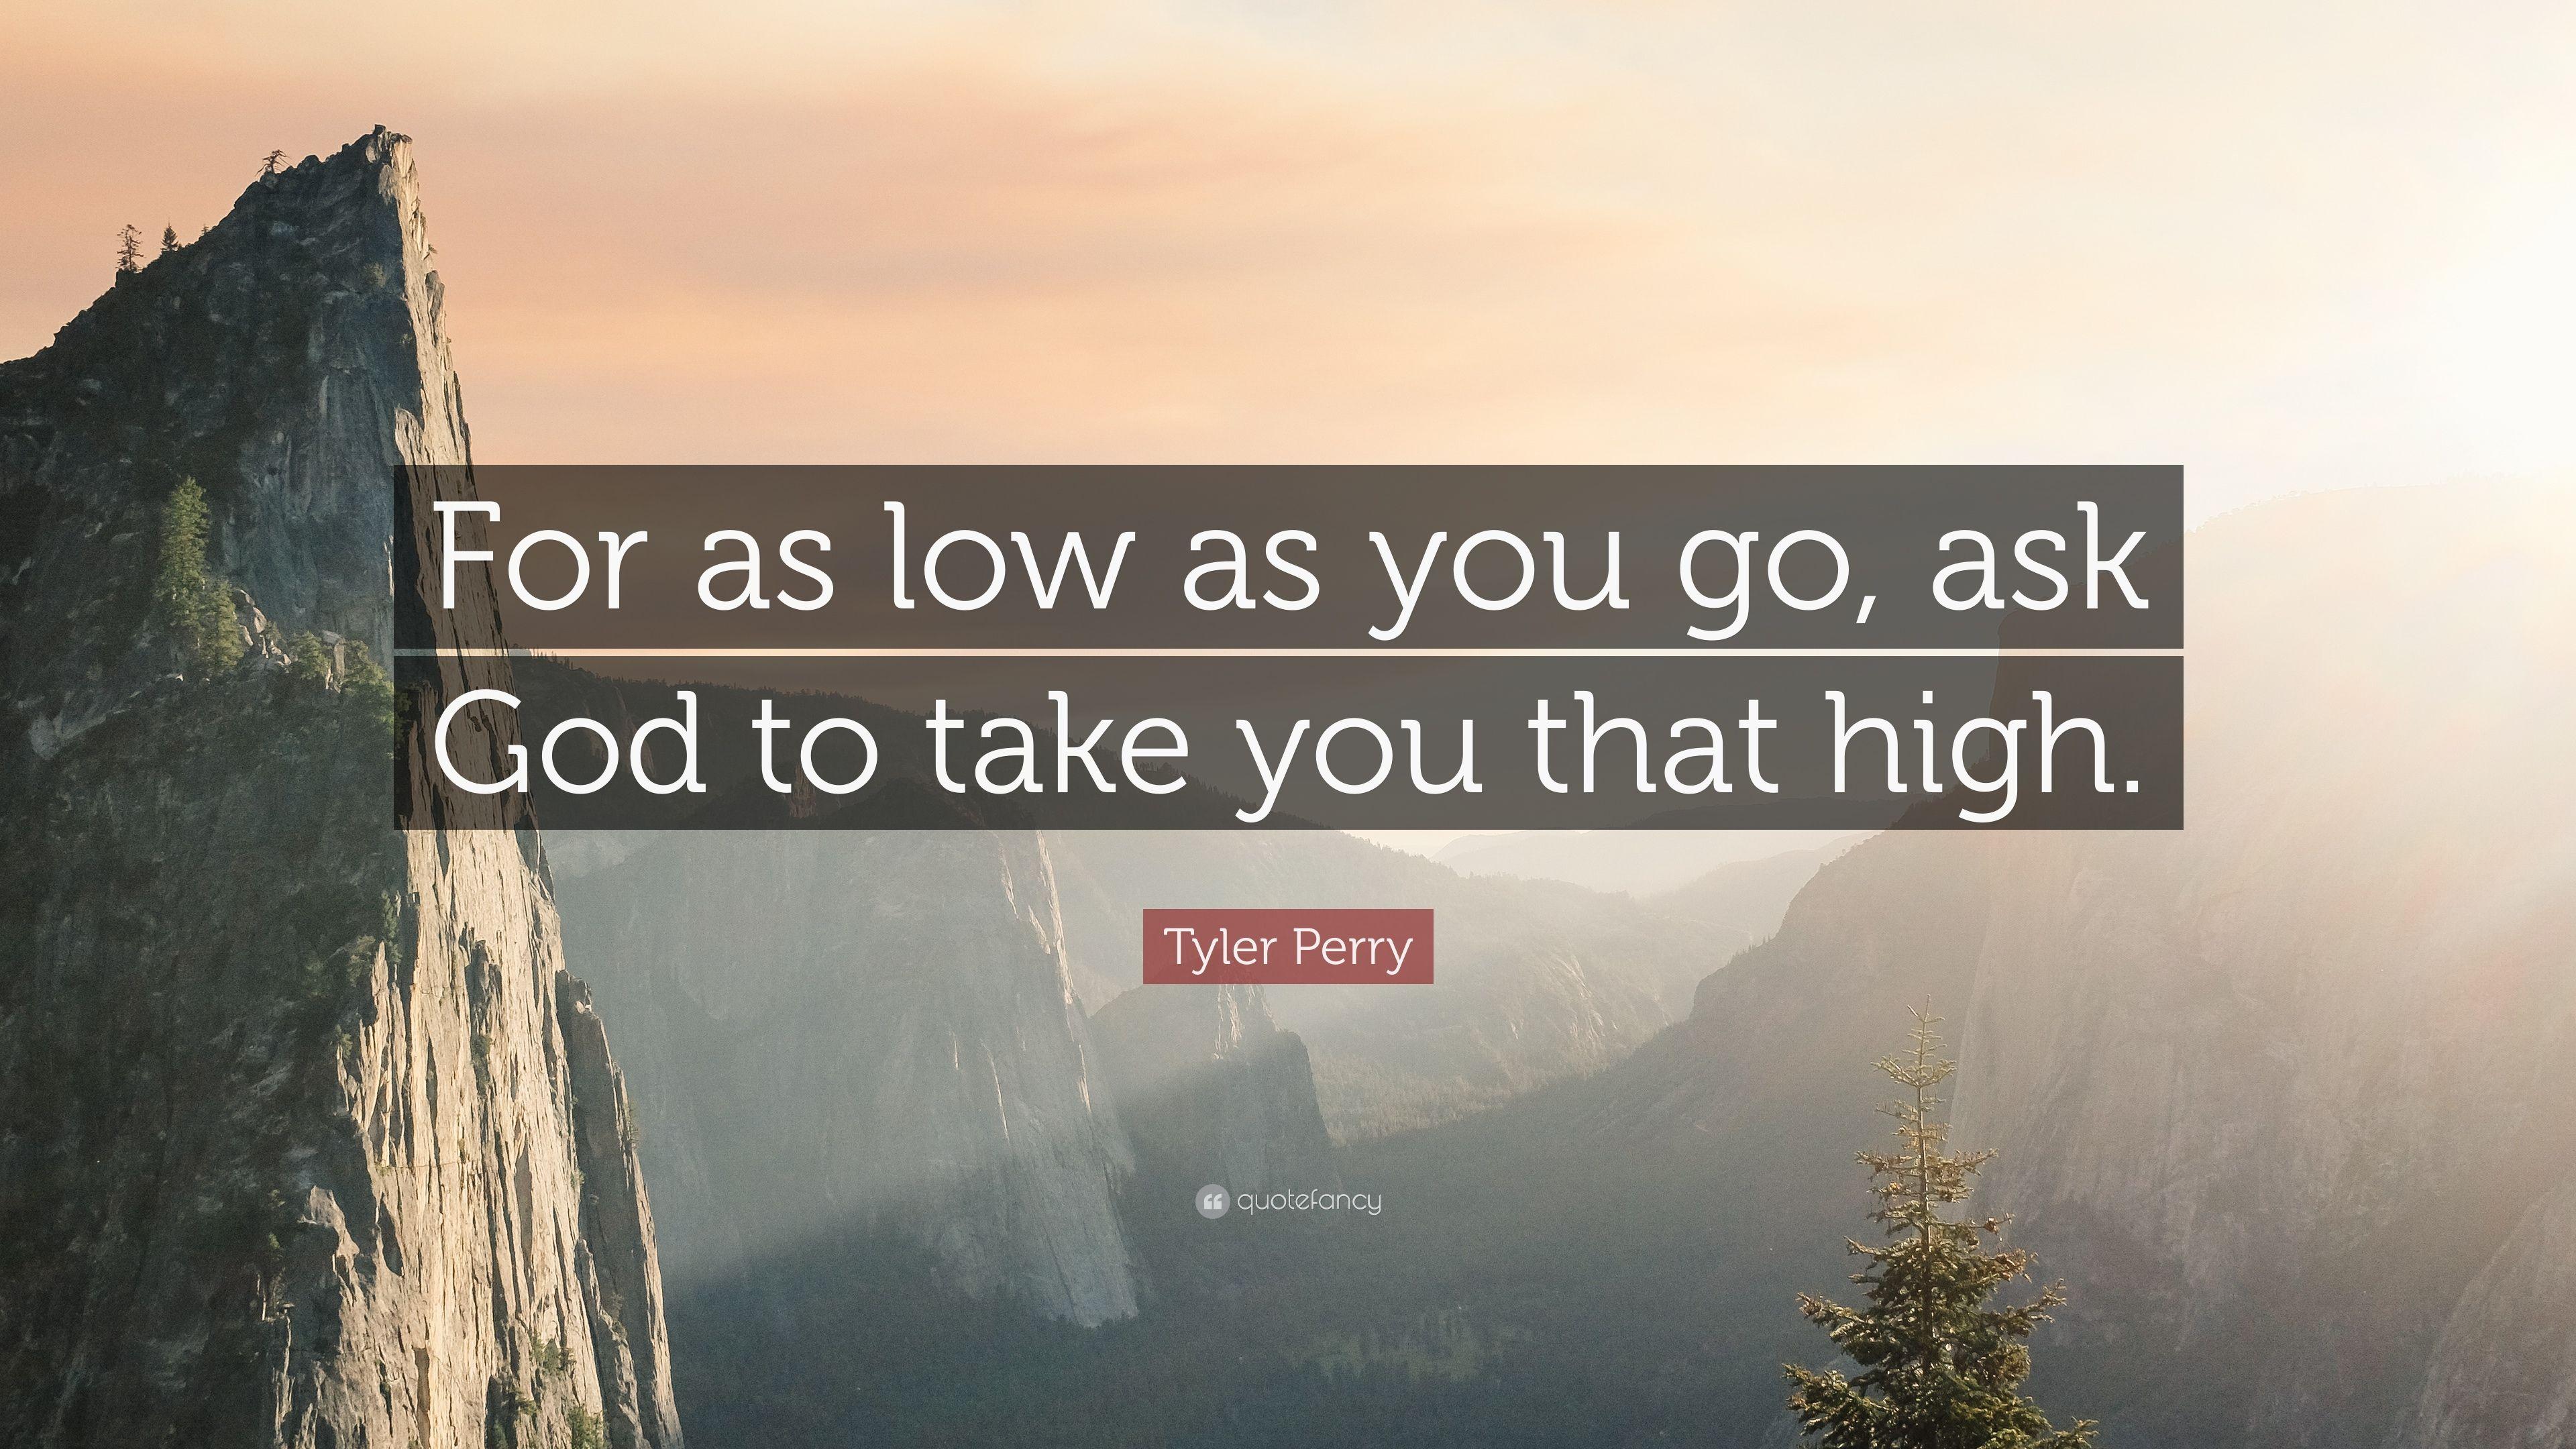 Tyler Perry Quote: “For as low as you go, ask God to take you that